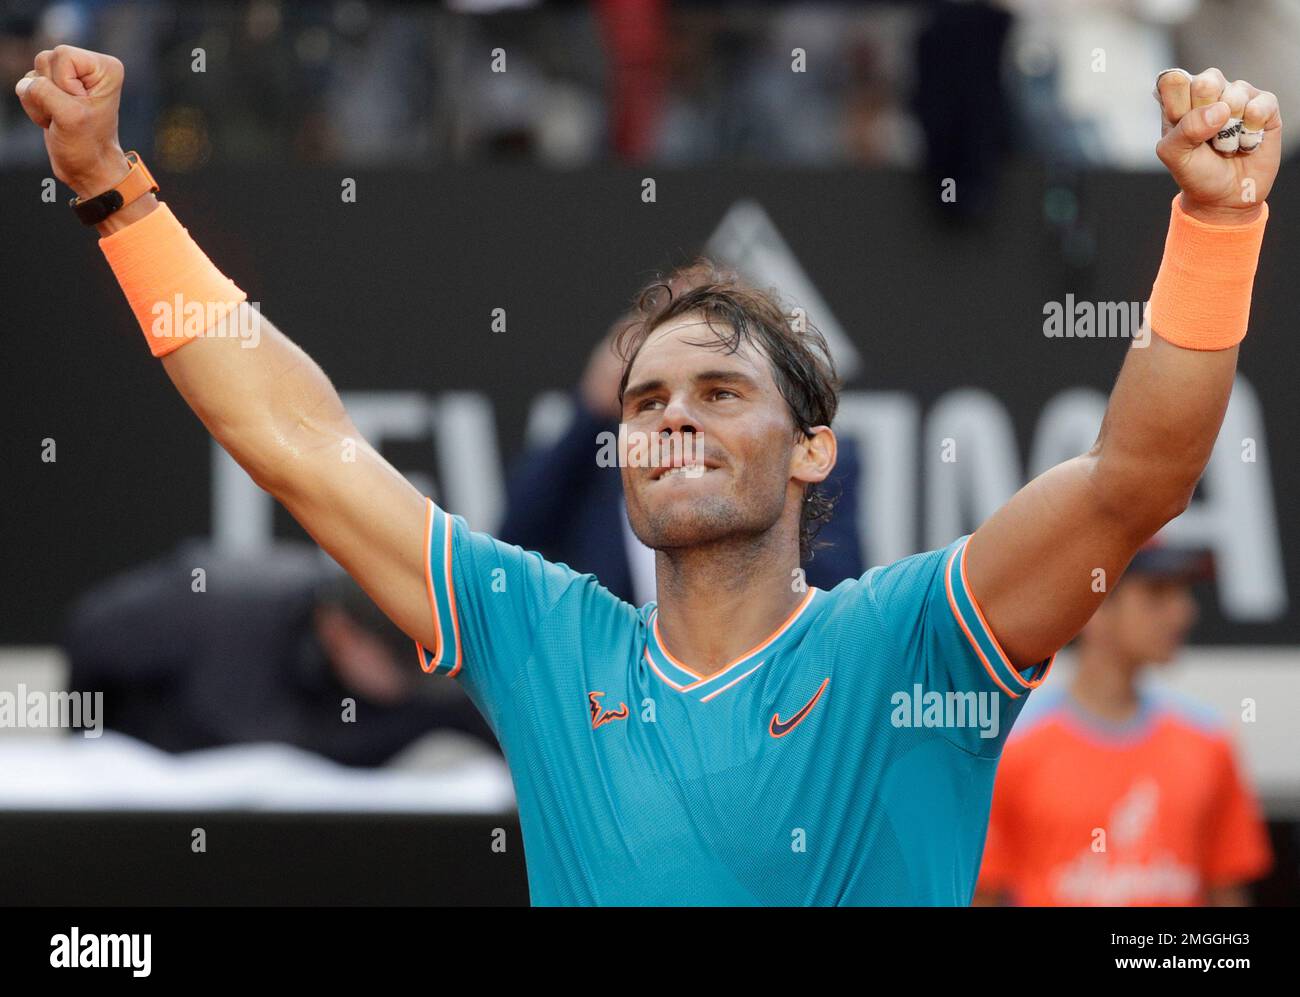 FILE - In this May 19, 2019, file photo, Rafael Nadal, of Spain, celebrates  after his victory over Novak Djokovic, of Serbia, at the end of their final  match at the Italian